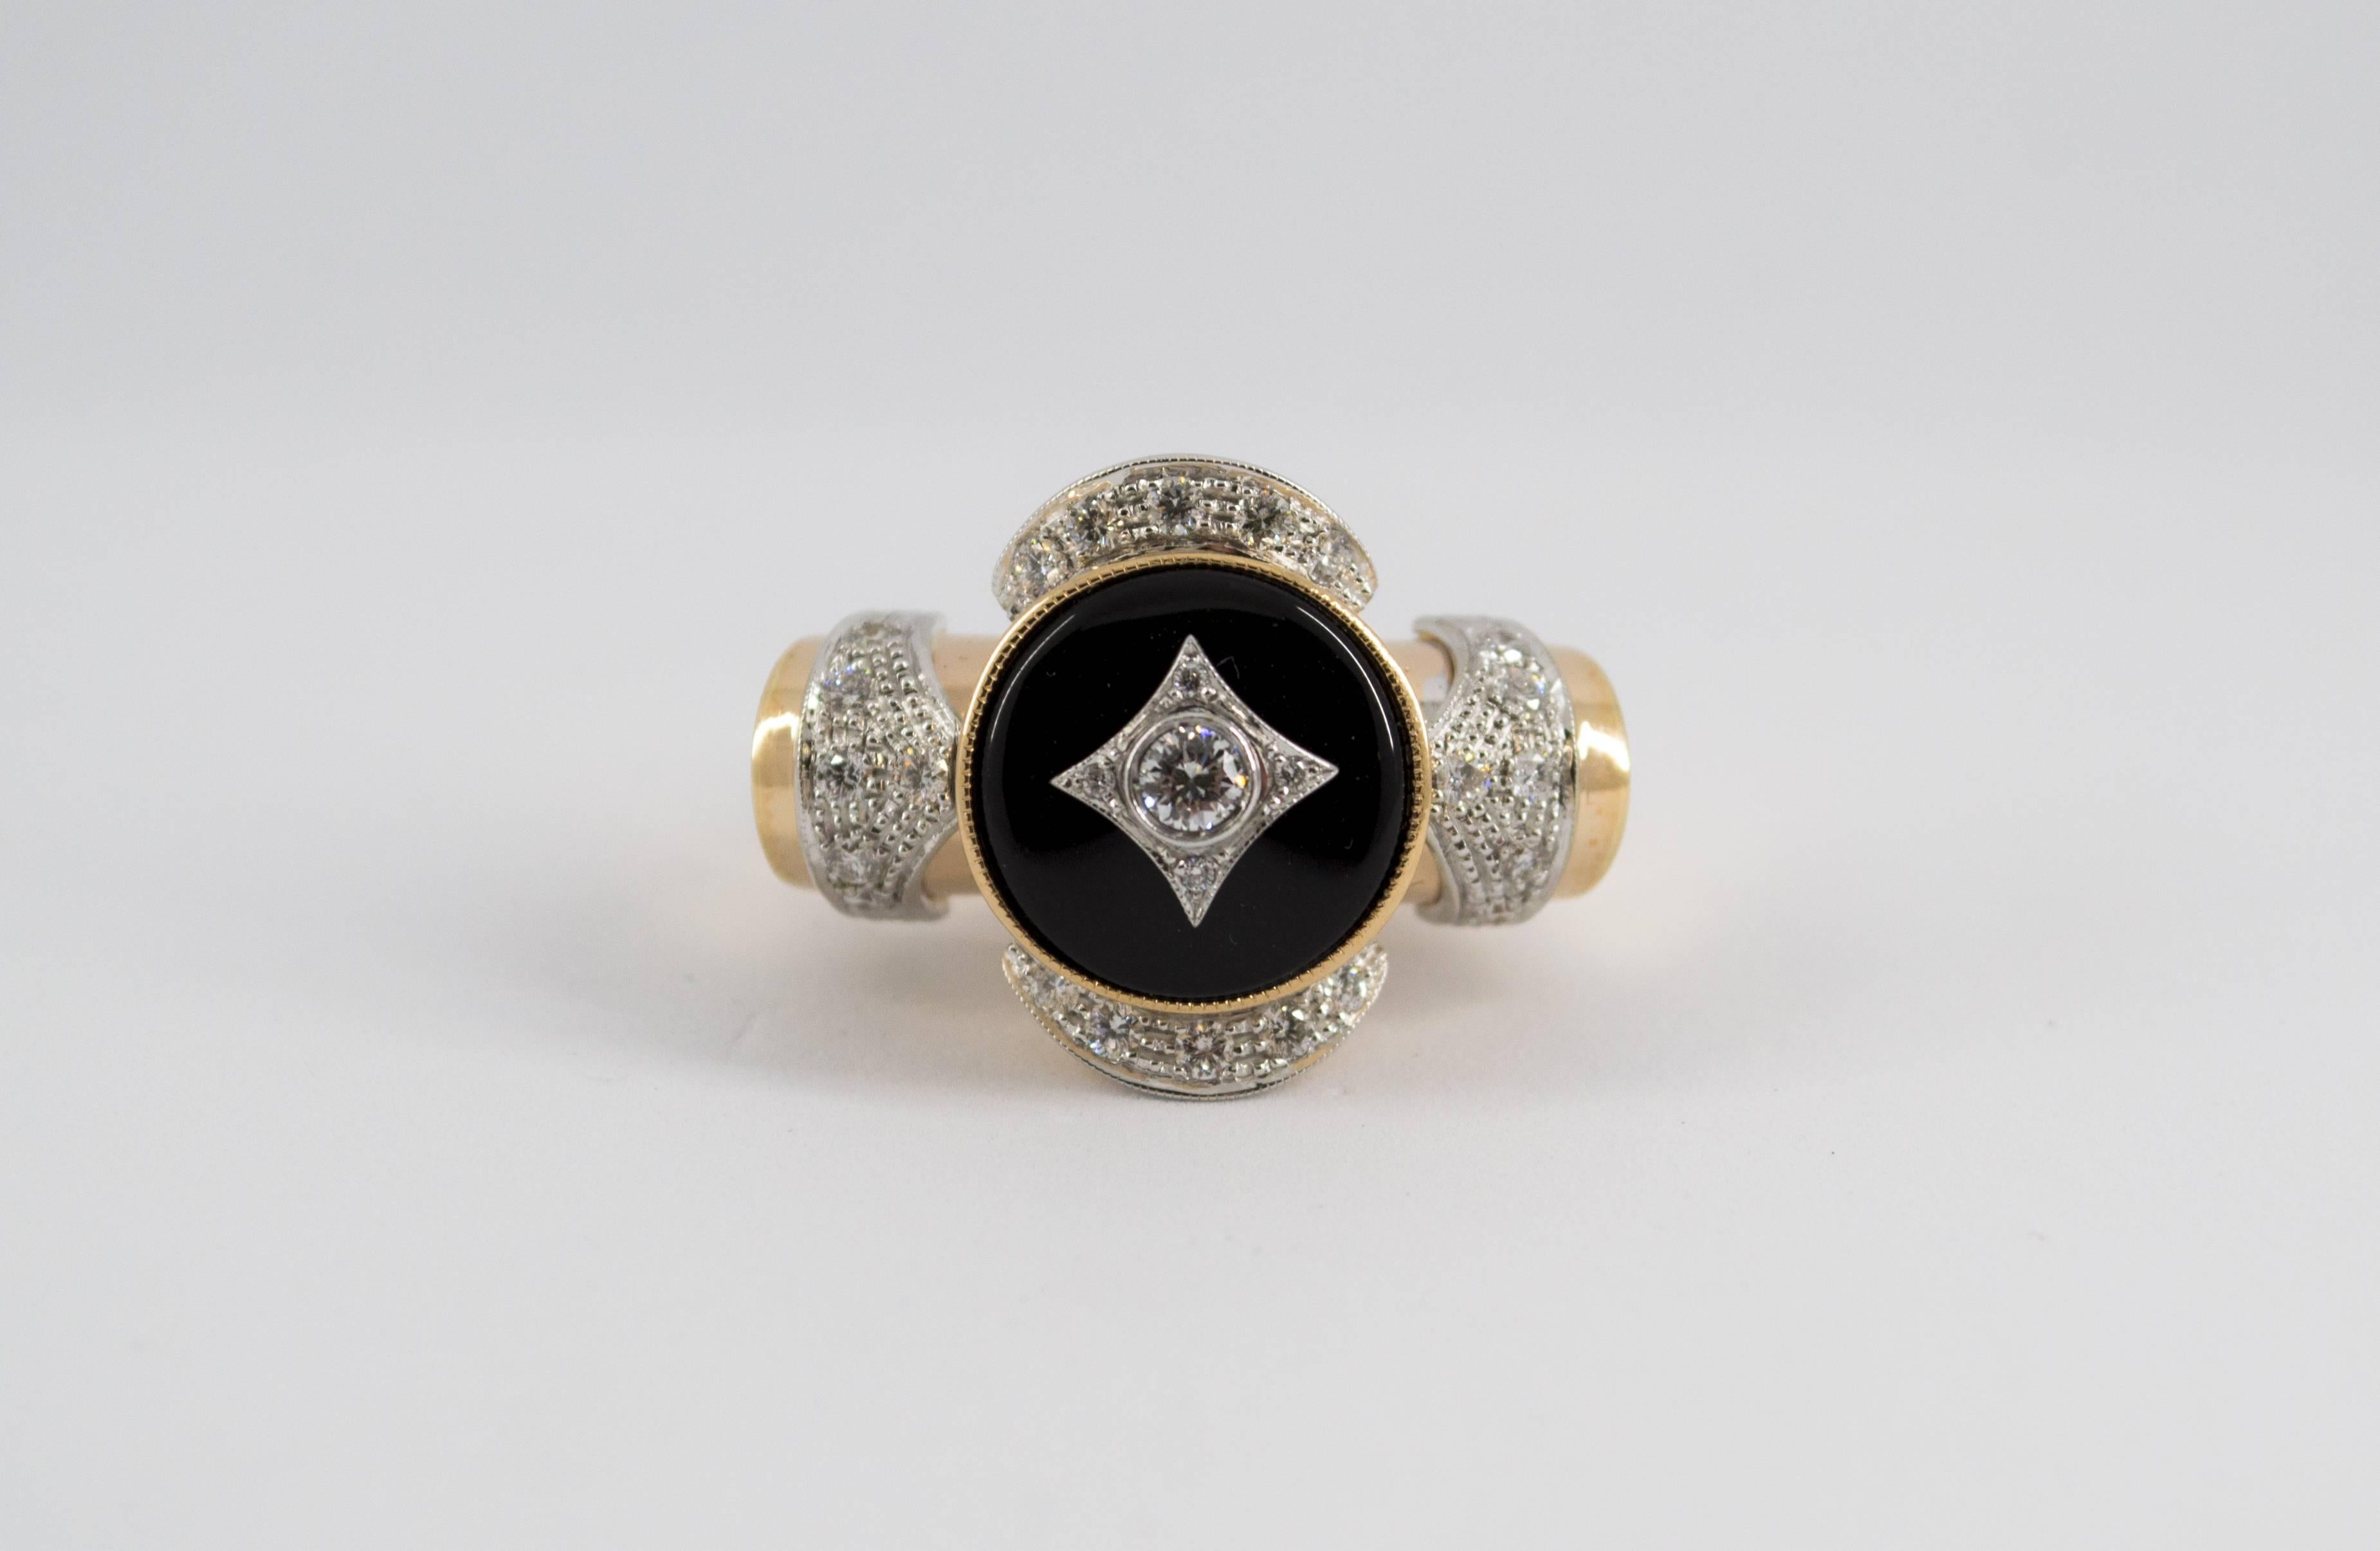 This Ring is made of 14K Yellow Gold.
This Ring has 0.75 Carats of White Diamonds.
This Ring has also Onyx.
This Ring is inspired by Art Deco.
Size ITA: 17 USA: 8
We're a workshop so every piece is handmade, customizable and resizable.